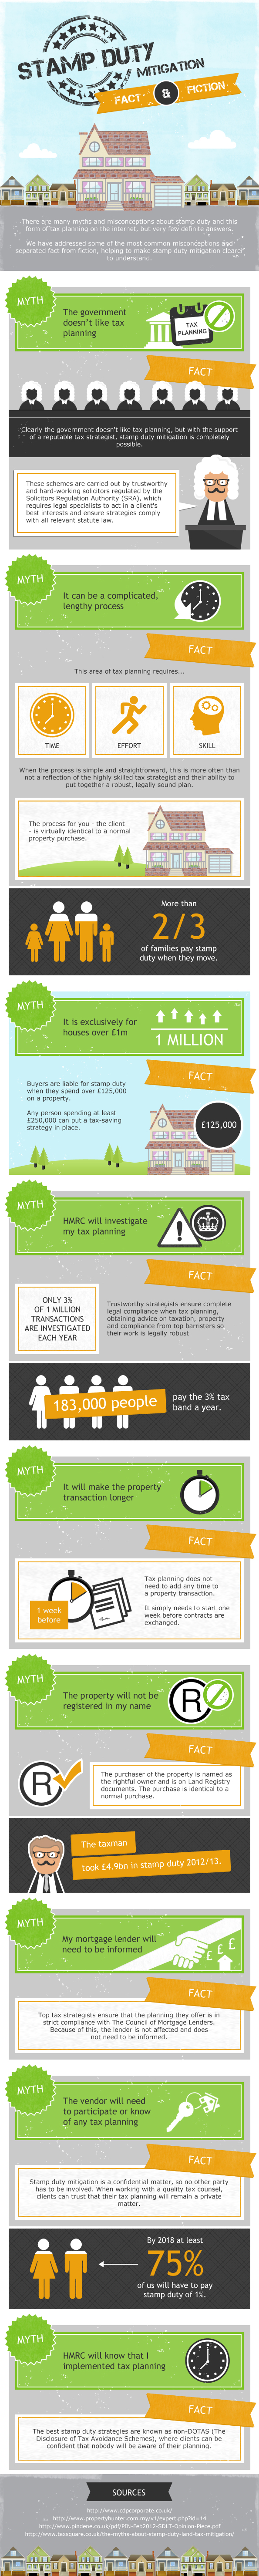 Stamp Duty Mitigation: Fact and Fiction